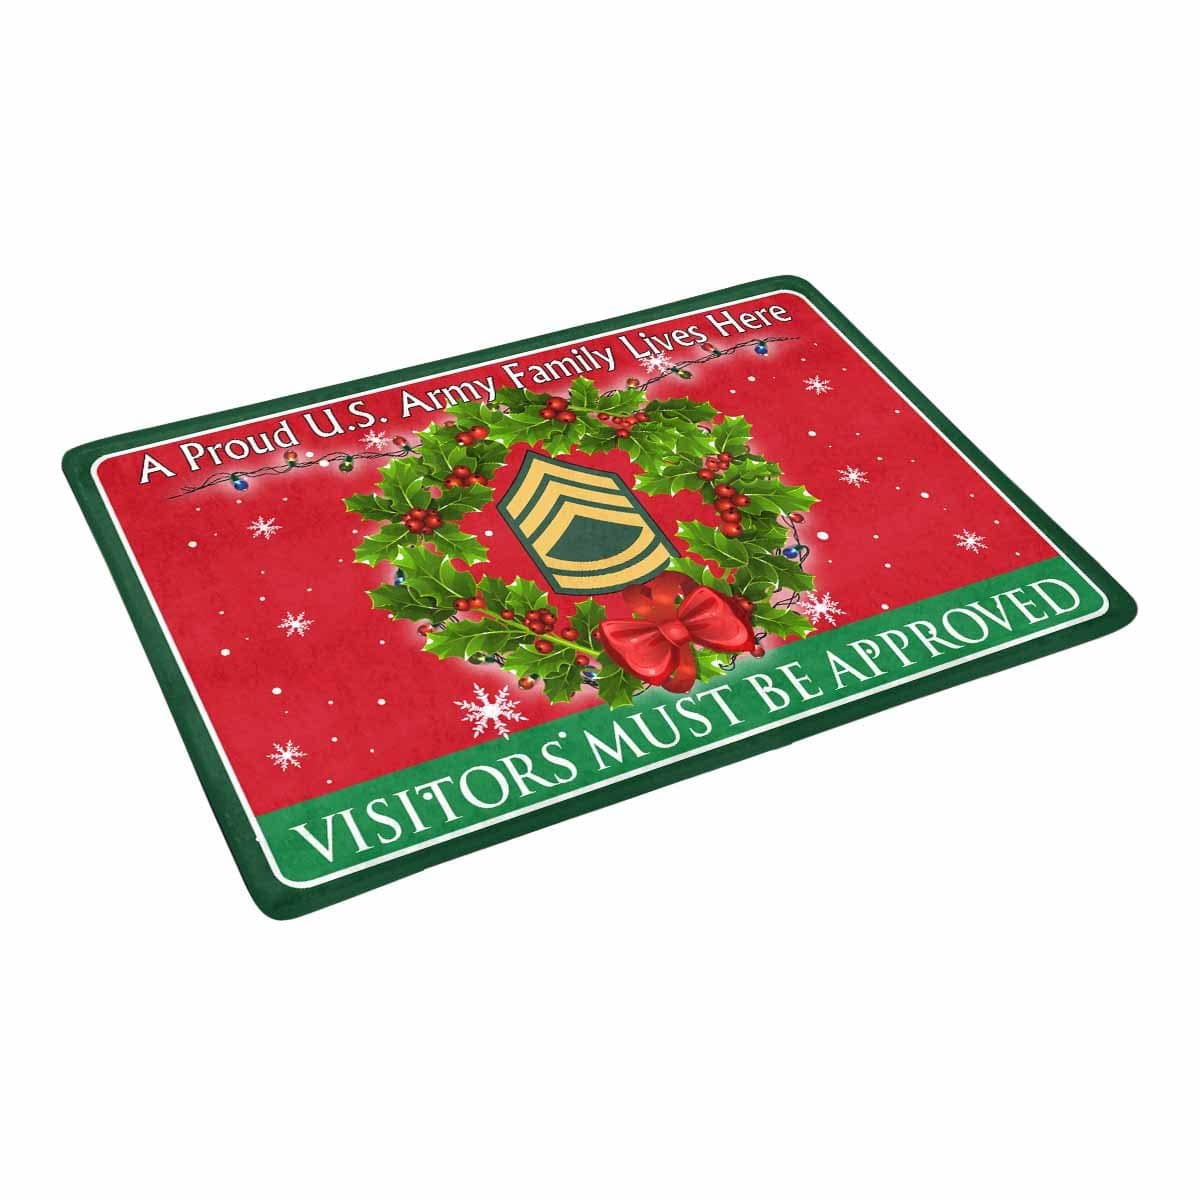 US Army E-7 Sergeant First Class E7 SFC Noncommissioned Officer Ranks - Visitors must be approved Christmas Doormat-Doormat-Army-Ranks-Veterans Nation